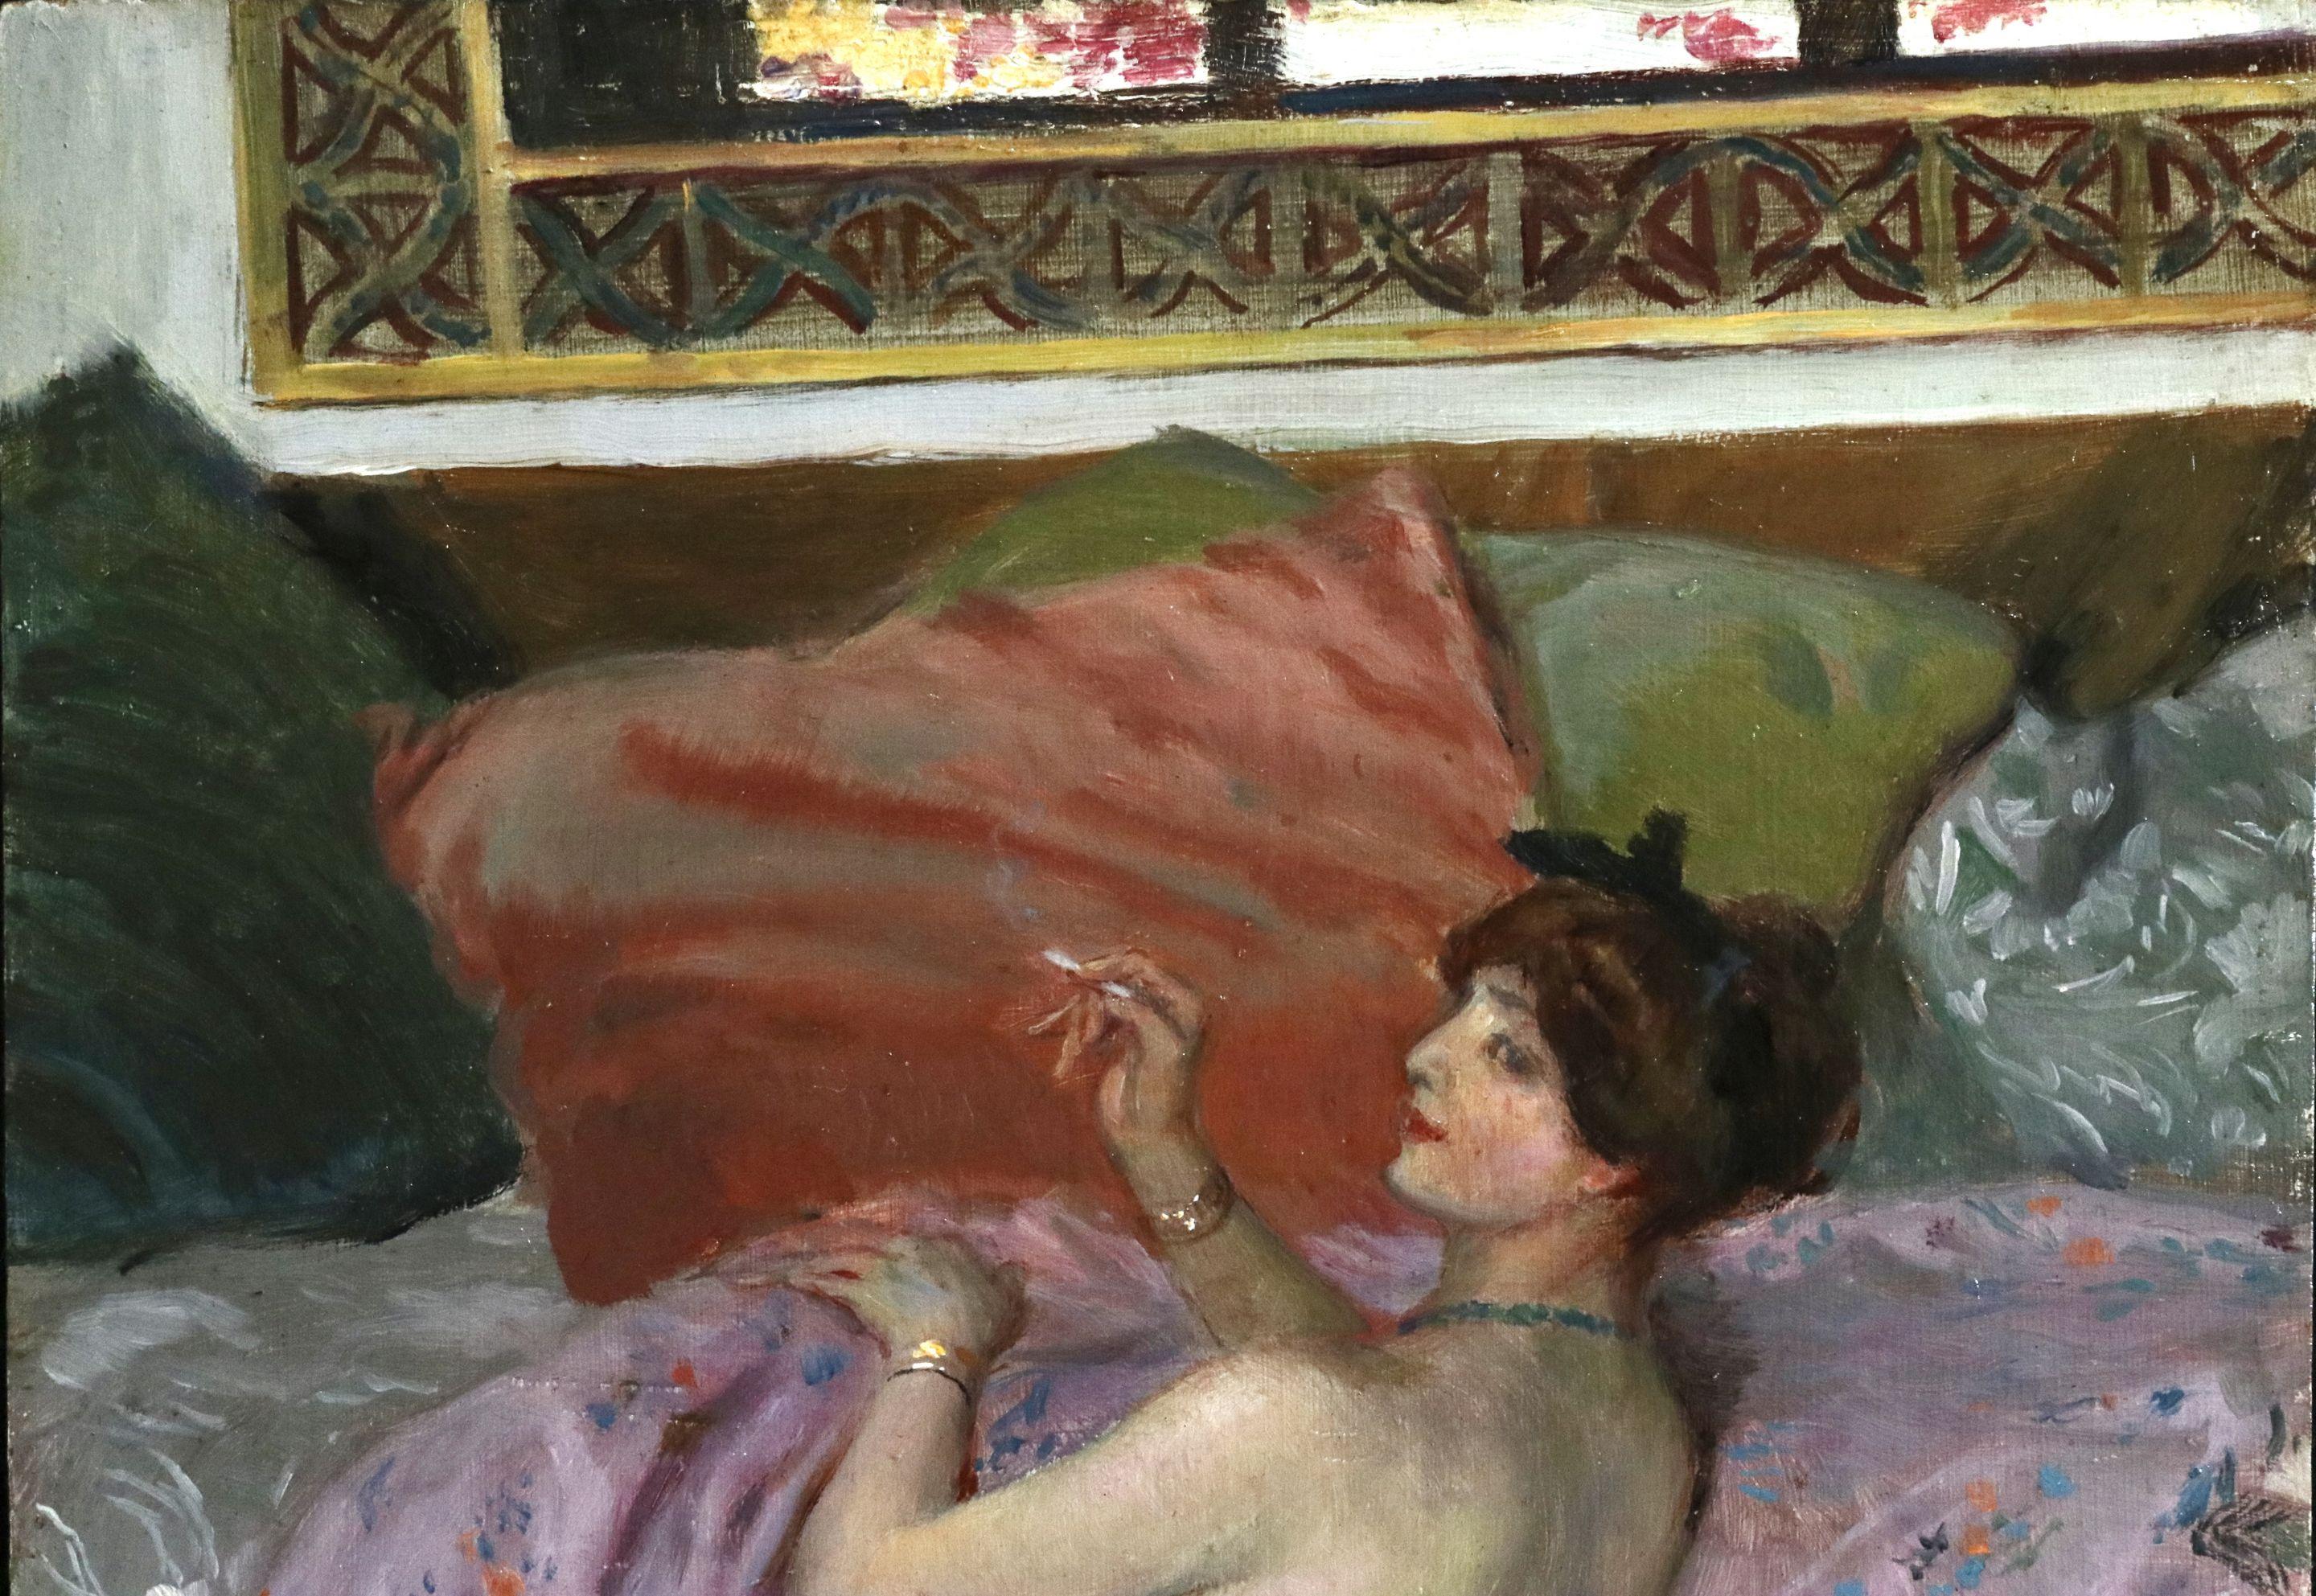 Nude Smoking a Cigarette - 19th Century Oil, Woman in Interior by Rochegrosse - Painting by Georges Antoine Rochegrosse